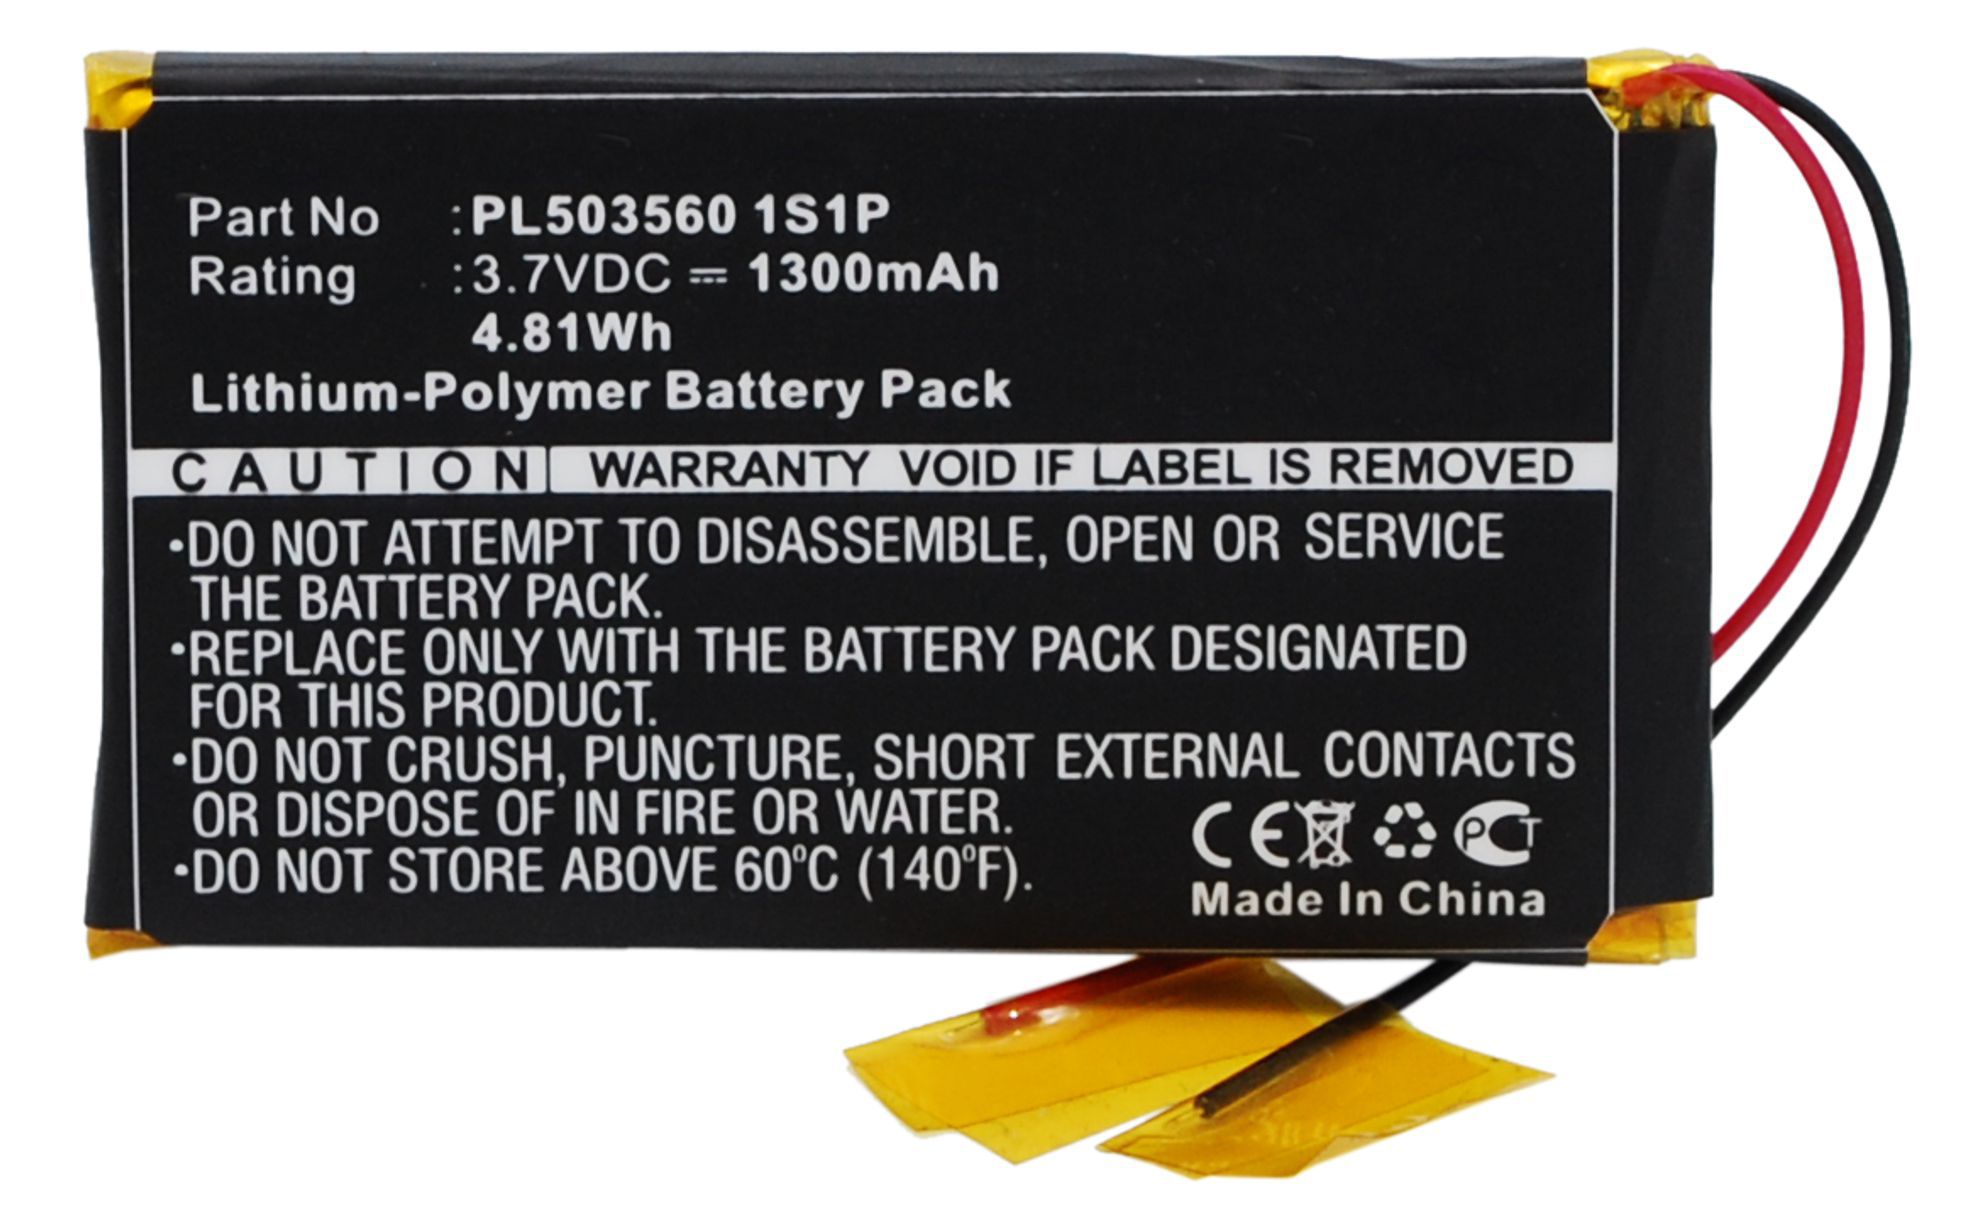 Synergy Digital Battery Compatible With Fiio PL5035601S1P Replacement Battery - (Li-Pol, 3.7V, 1300 mAh)